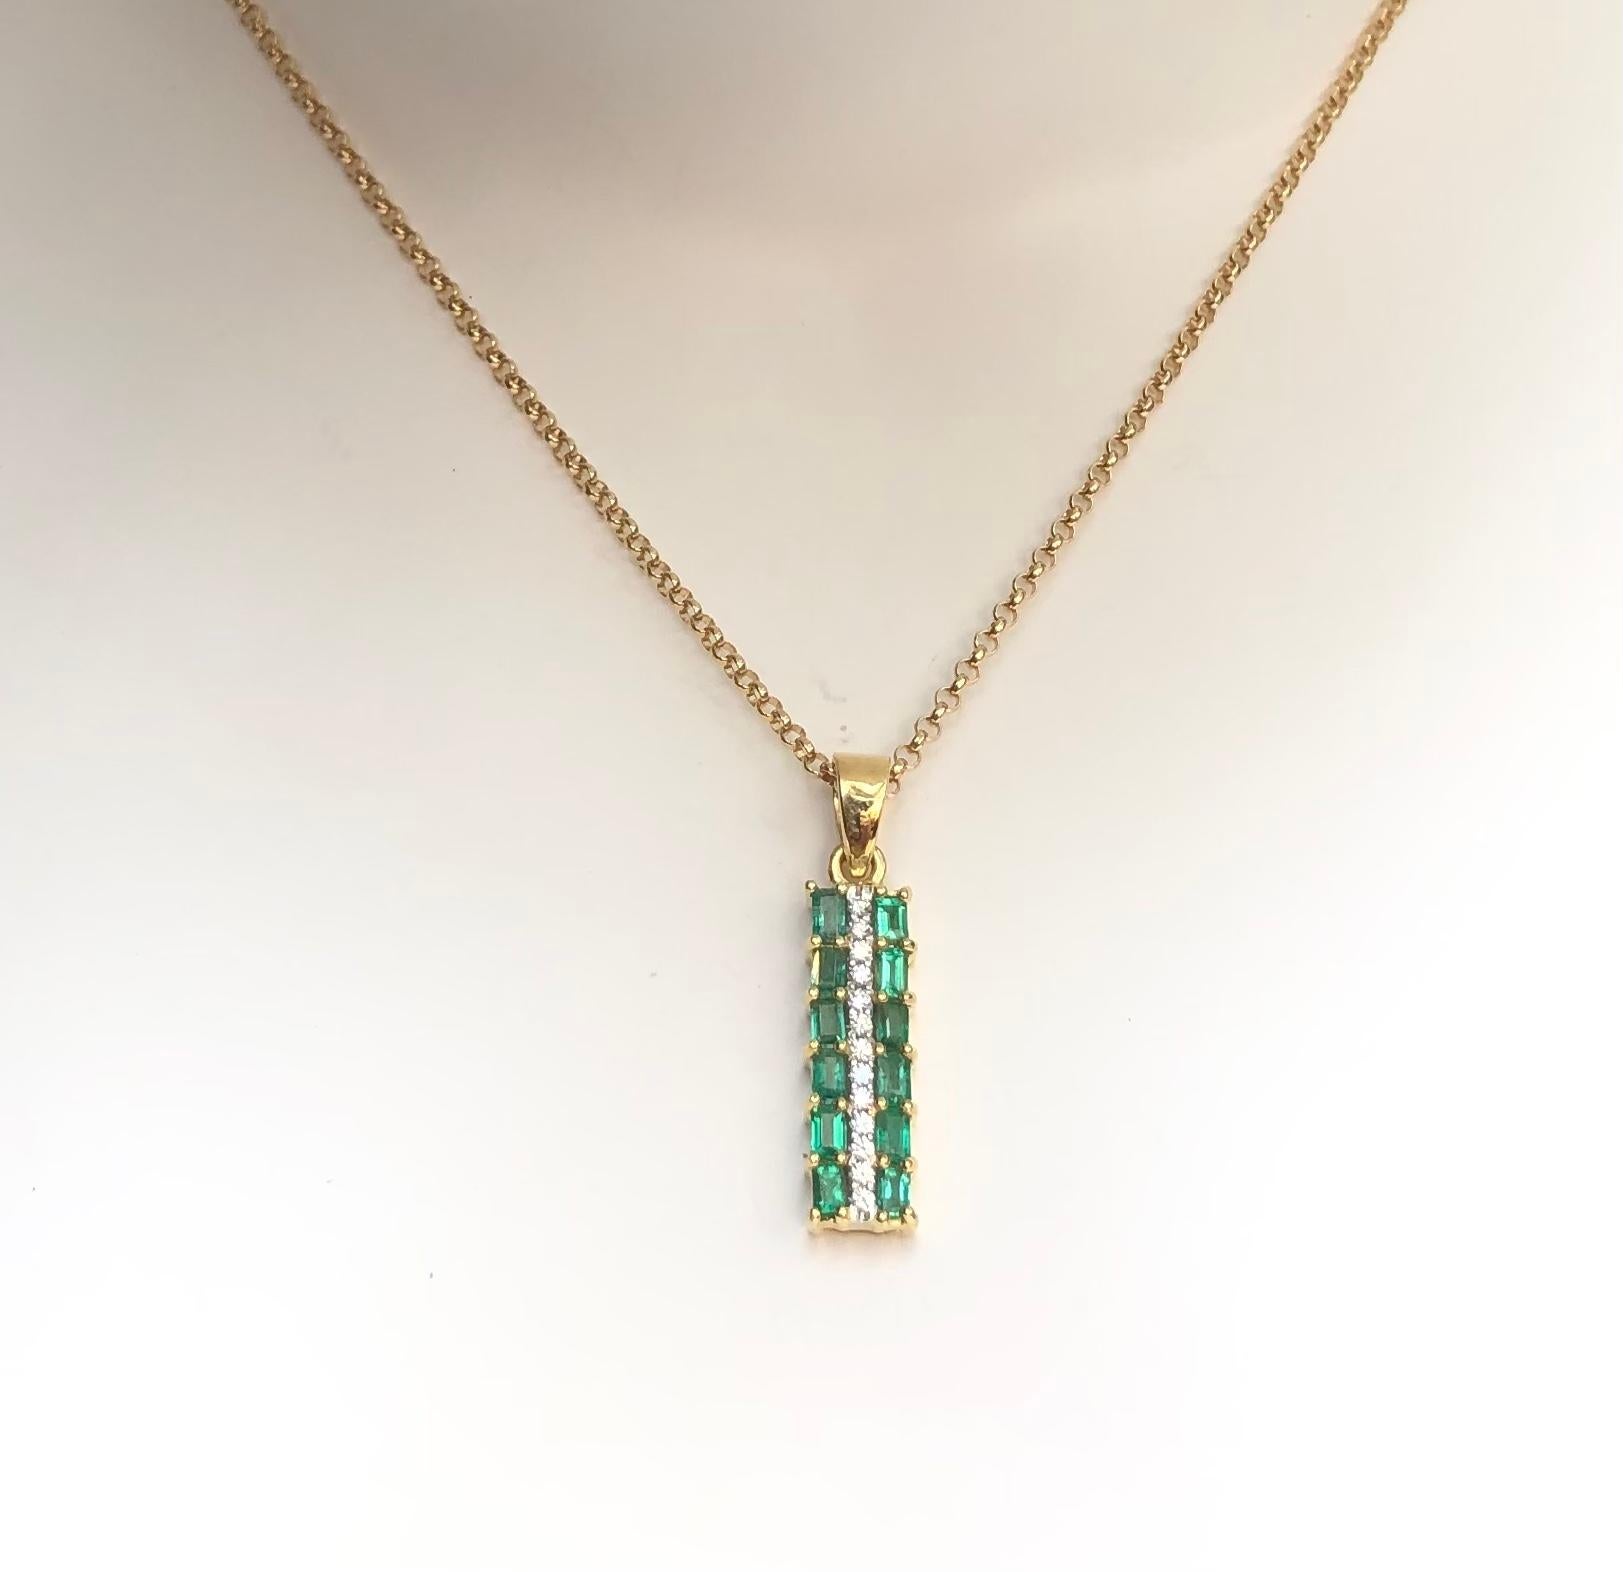 Emerald 0.84 carat with Diamond 0.12 carat Pendant set in 18 Karat Gold Settings
(chain not included)

Width:  0.5 cm 
Length: 2.7 cm
Total Weight: 3.77 grams

